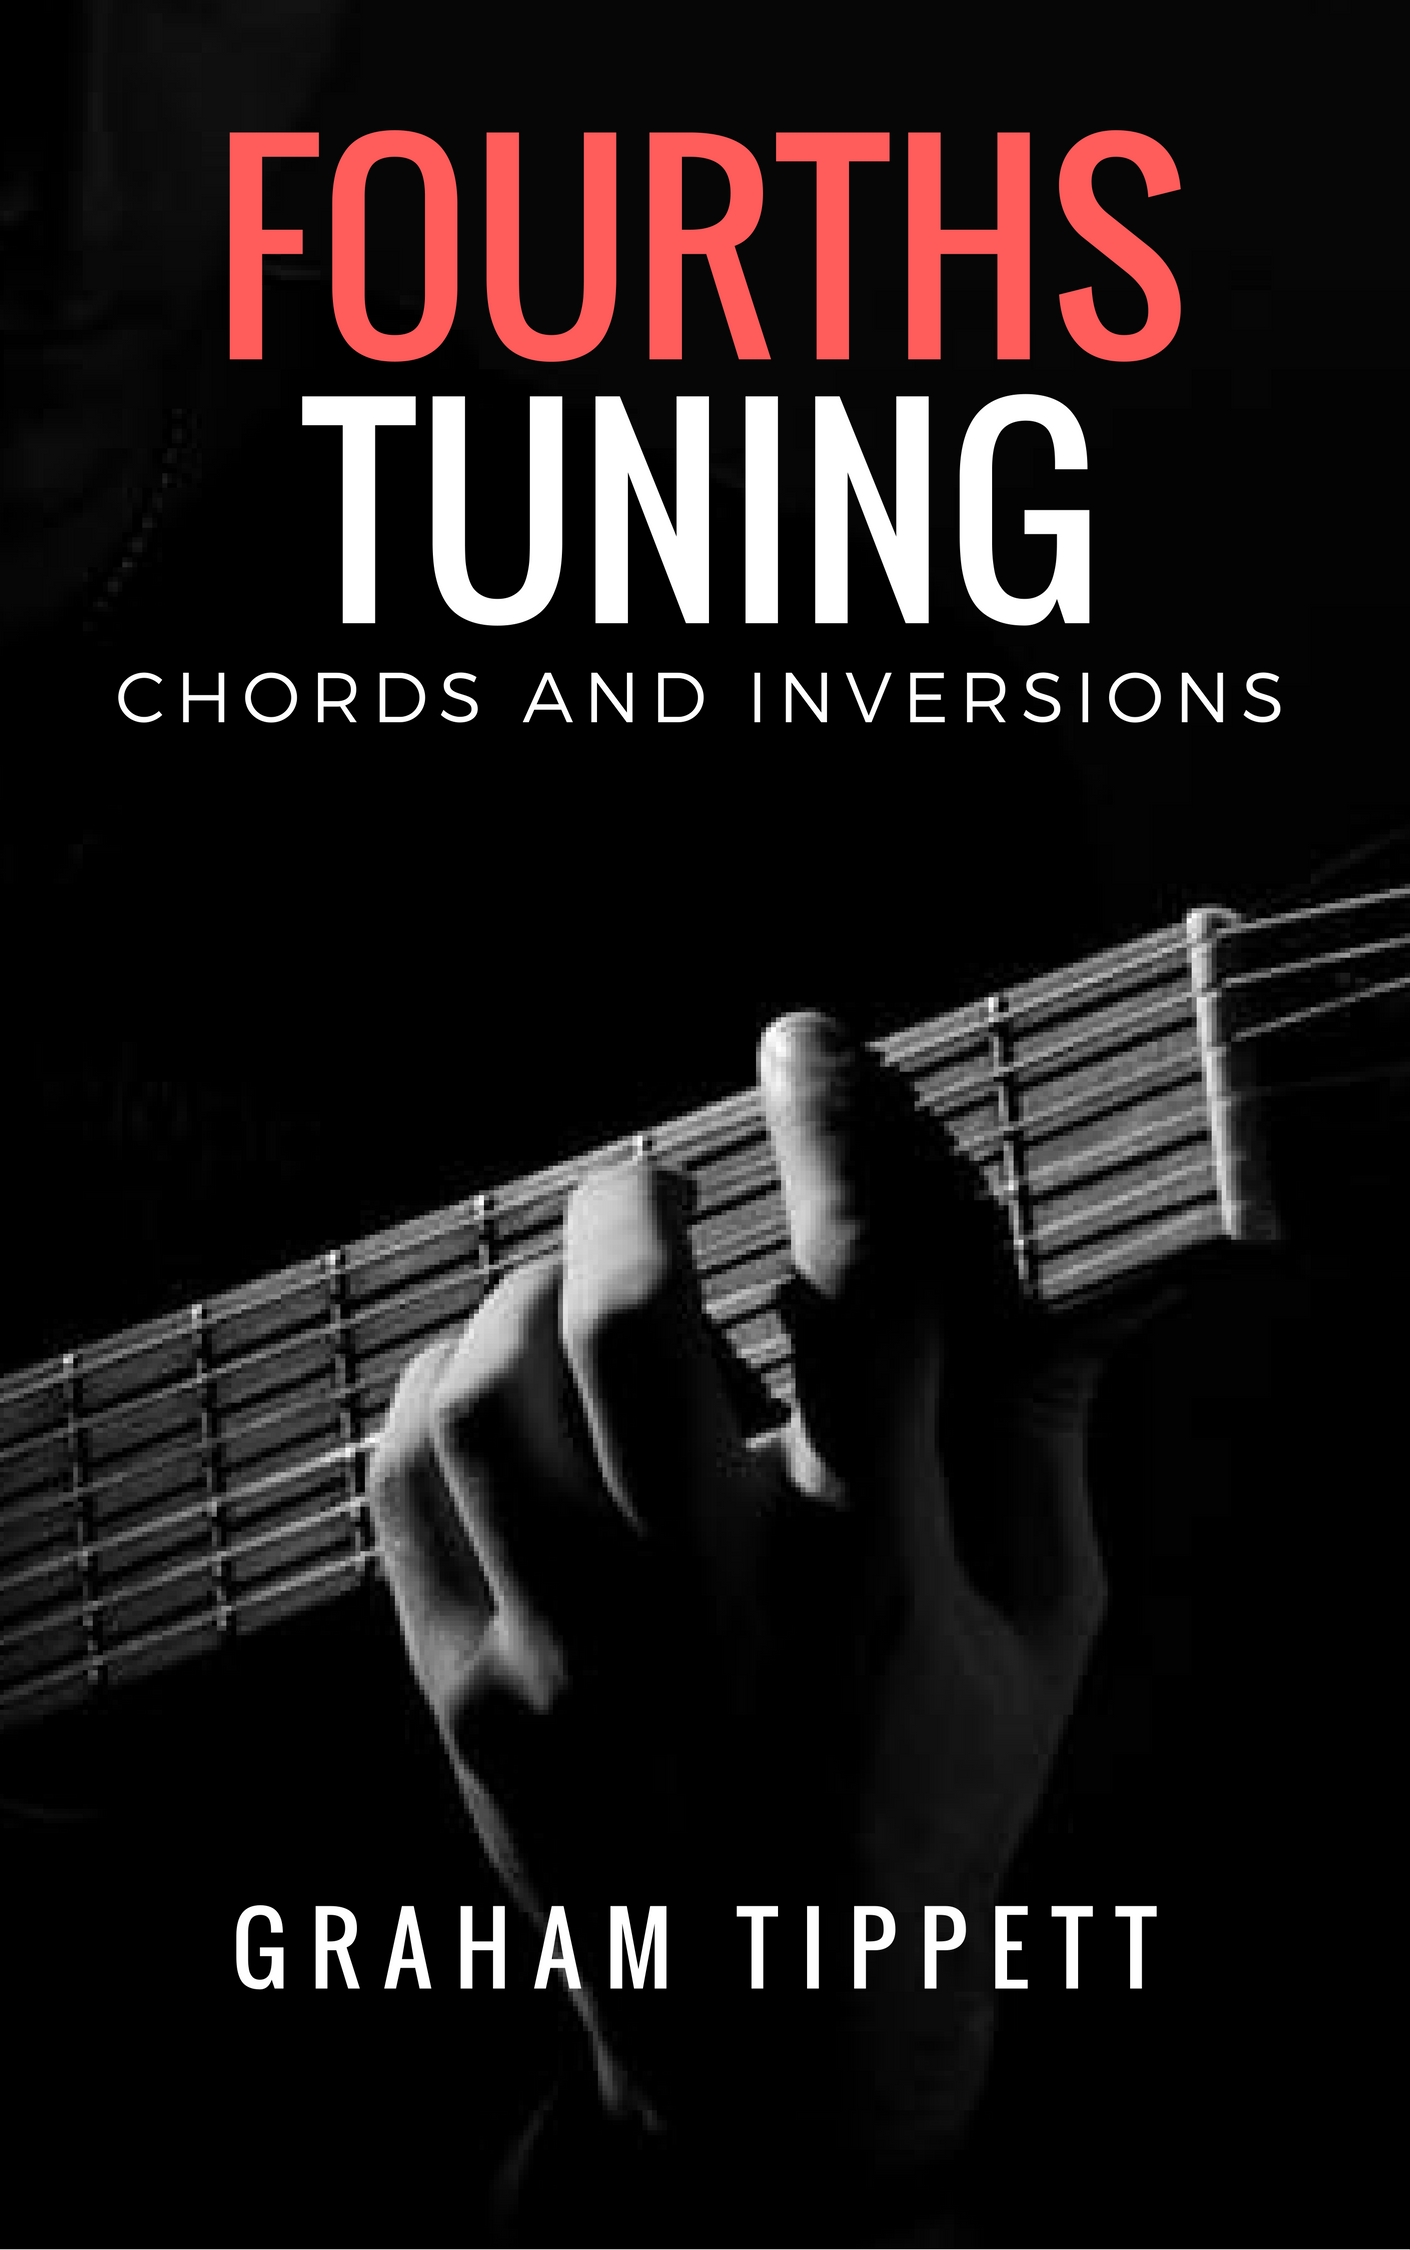 Fourths Tuning - Chords and Inversions